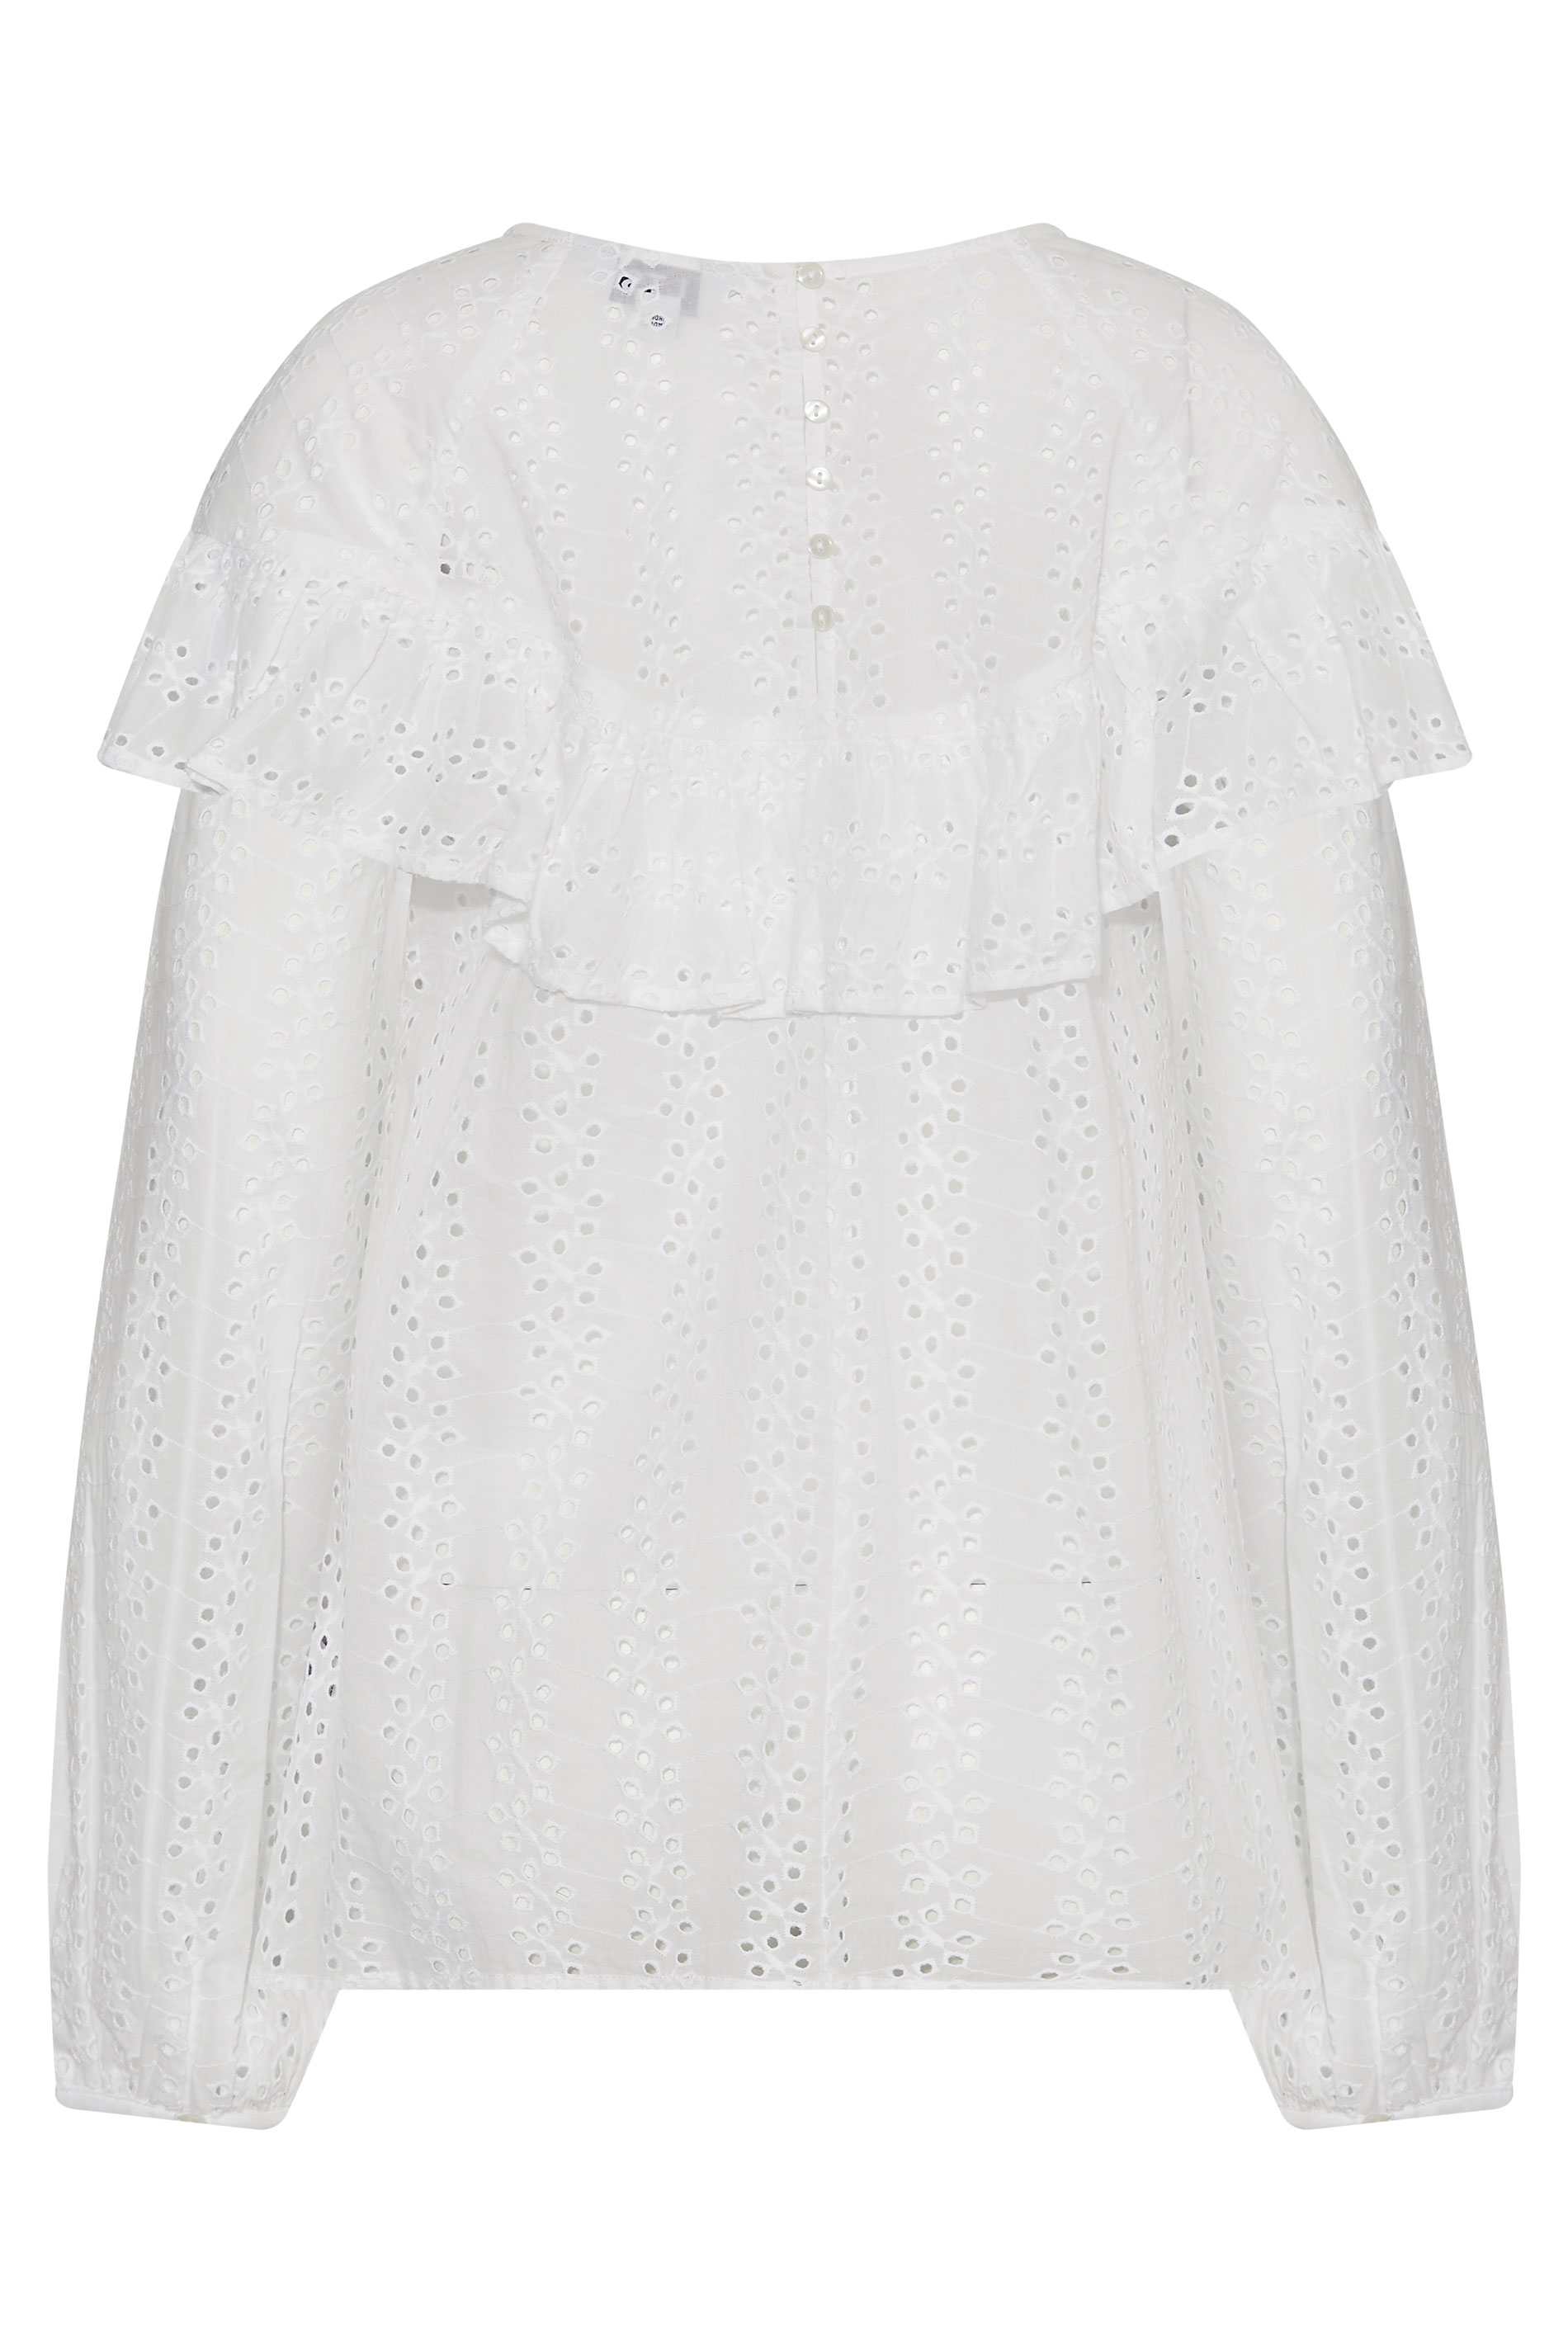 Tall Women's LTS White Broderie Anglaise Ruffle Top | Long Tall Sally